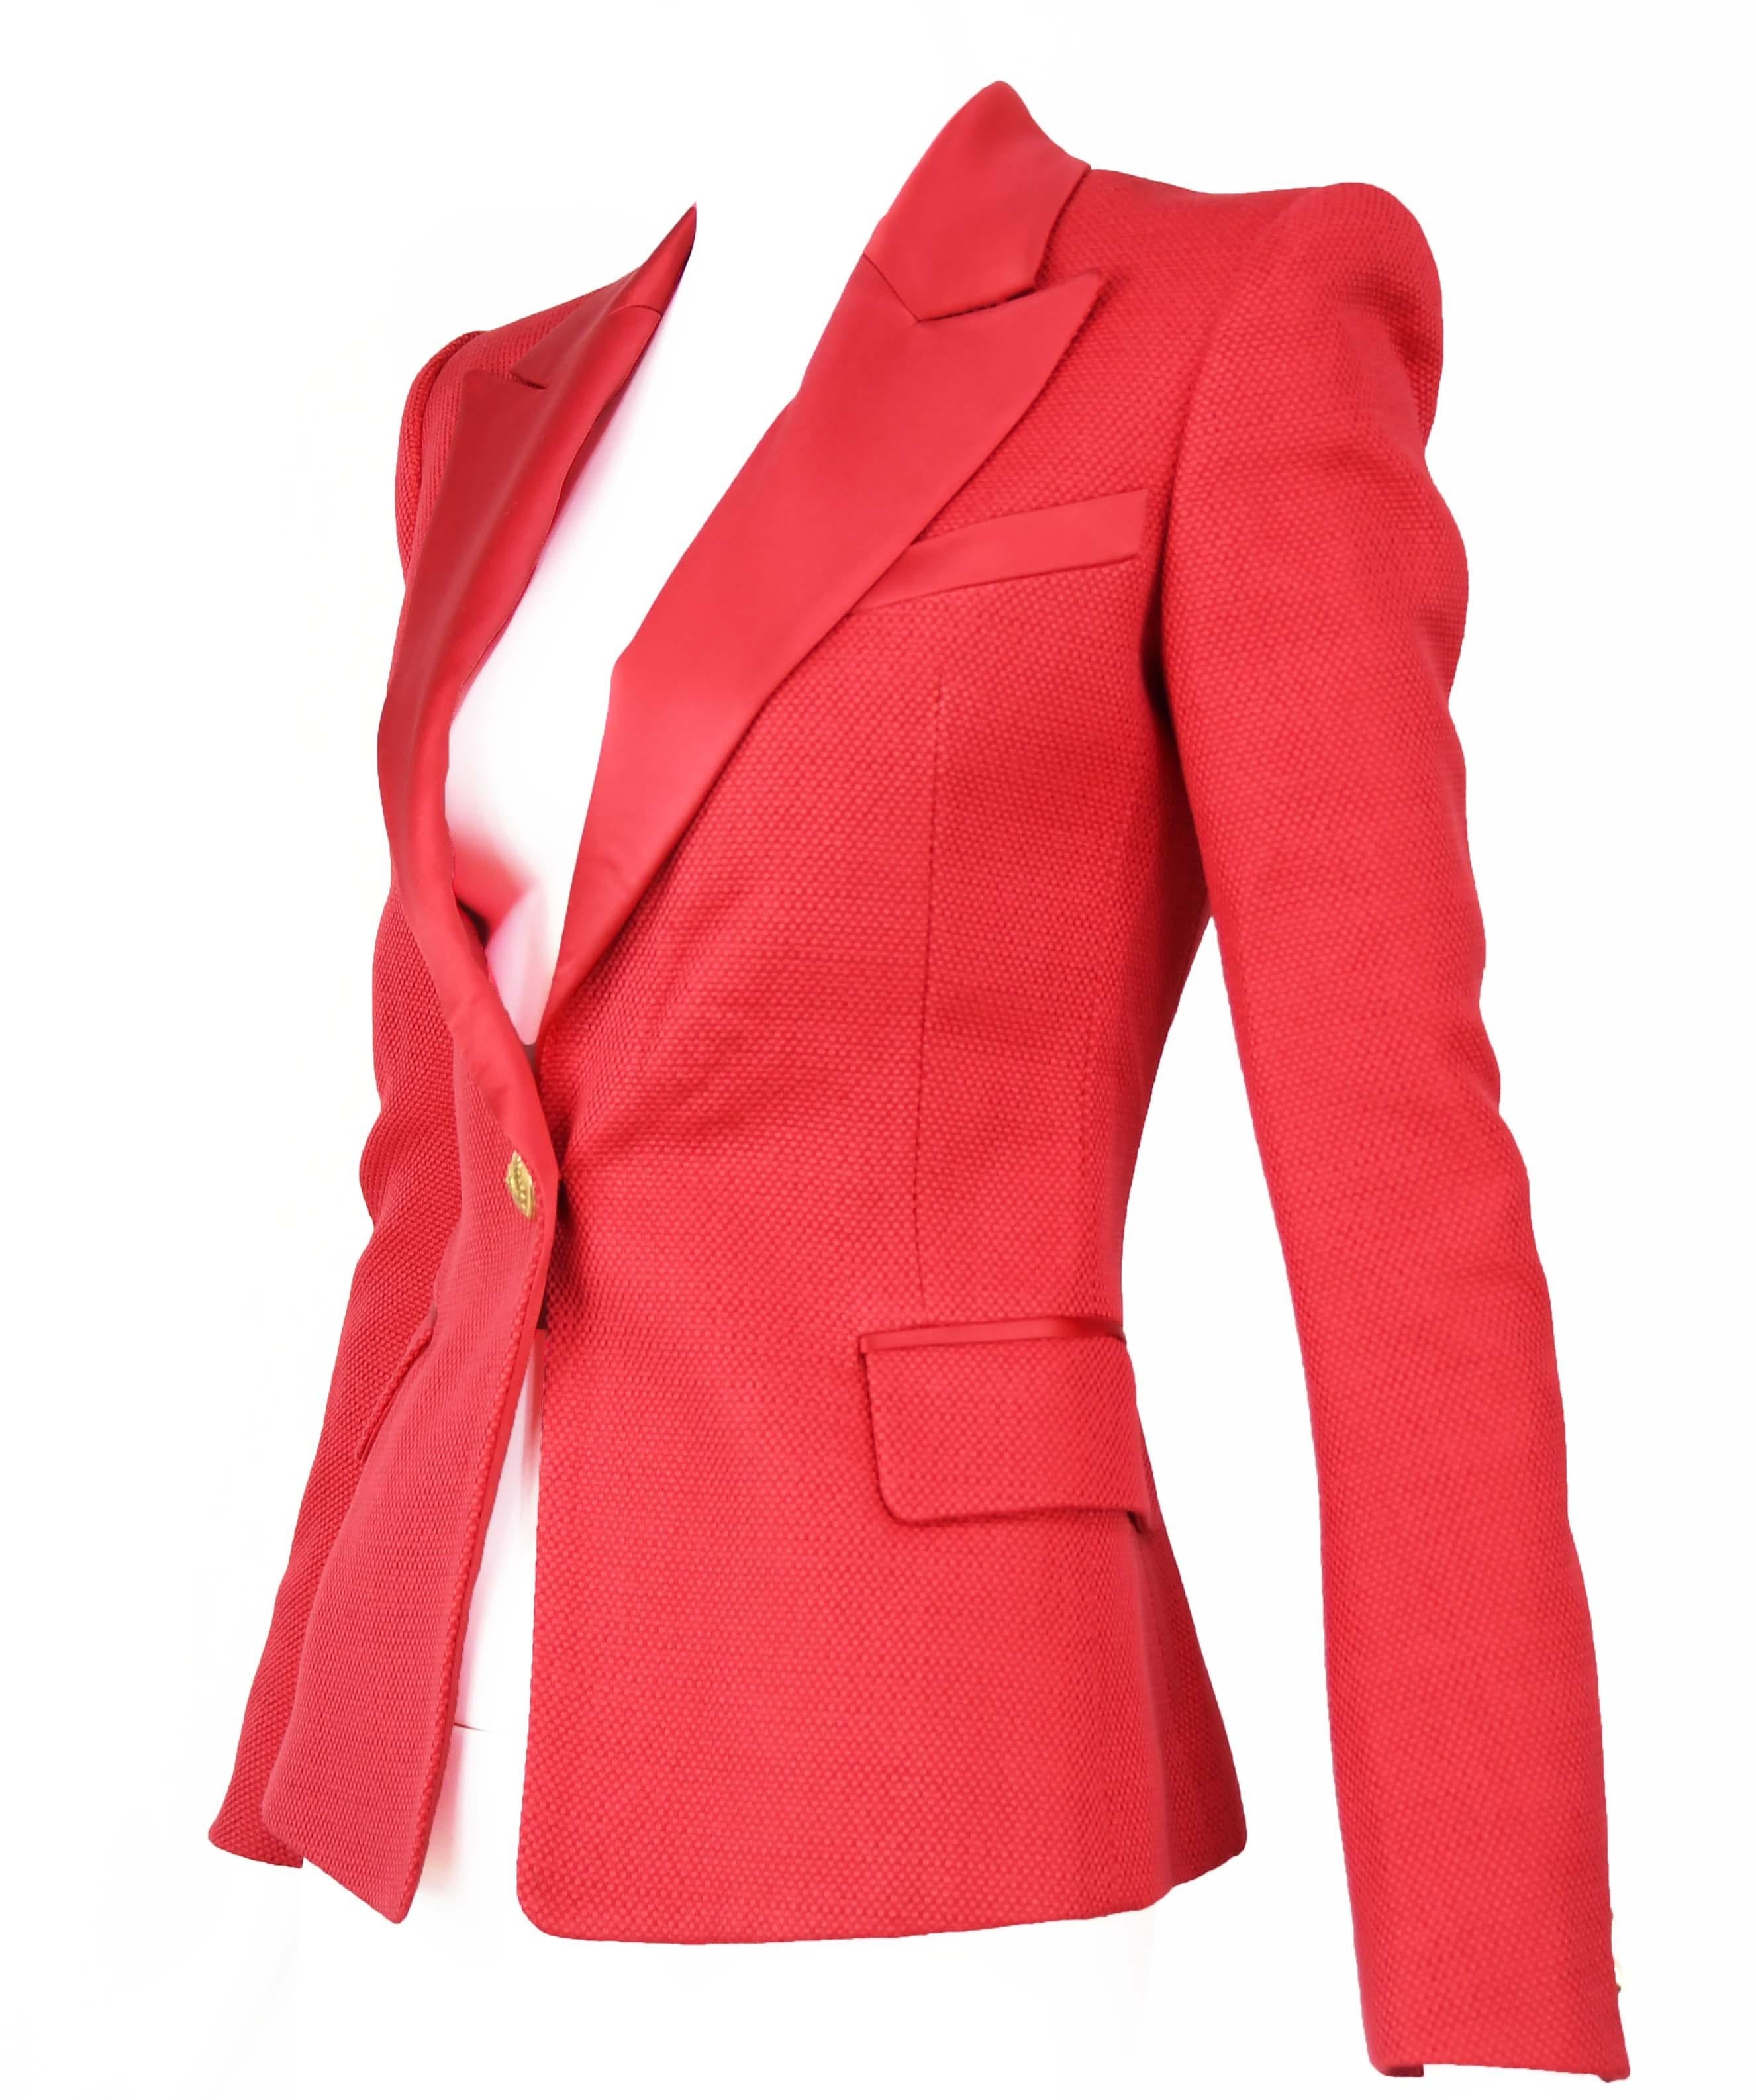 Single breasted bright red Balmain pique blazer with satin collar.  Gold button with Indian head.  Brand new item with original tags.

Condition: Brand new with original tags

Composition: 100% viscose / (collar) 100% silk / (lining) 52% viscose,